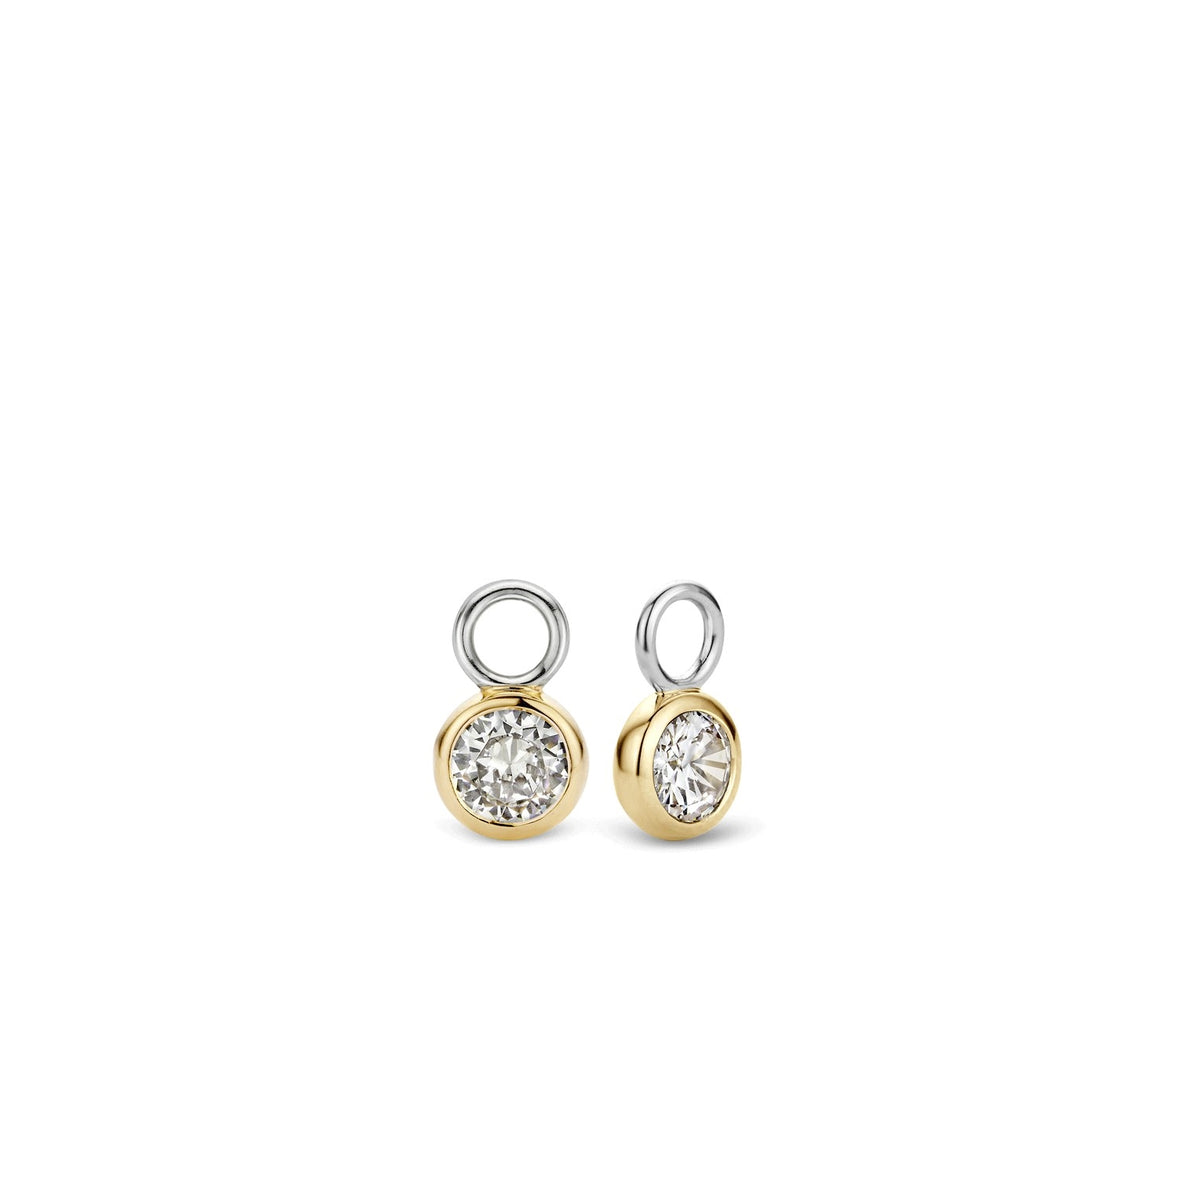 TI SENTO Sterling Silver Gold Tone Ear Charms with Bezel Set Cubic Zirconia